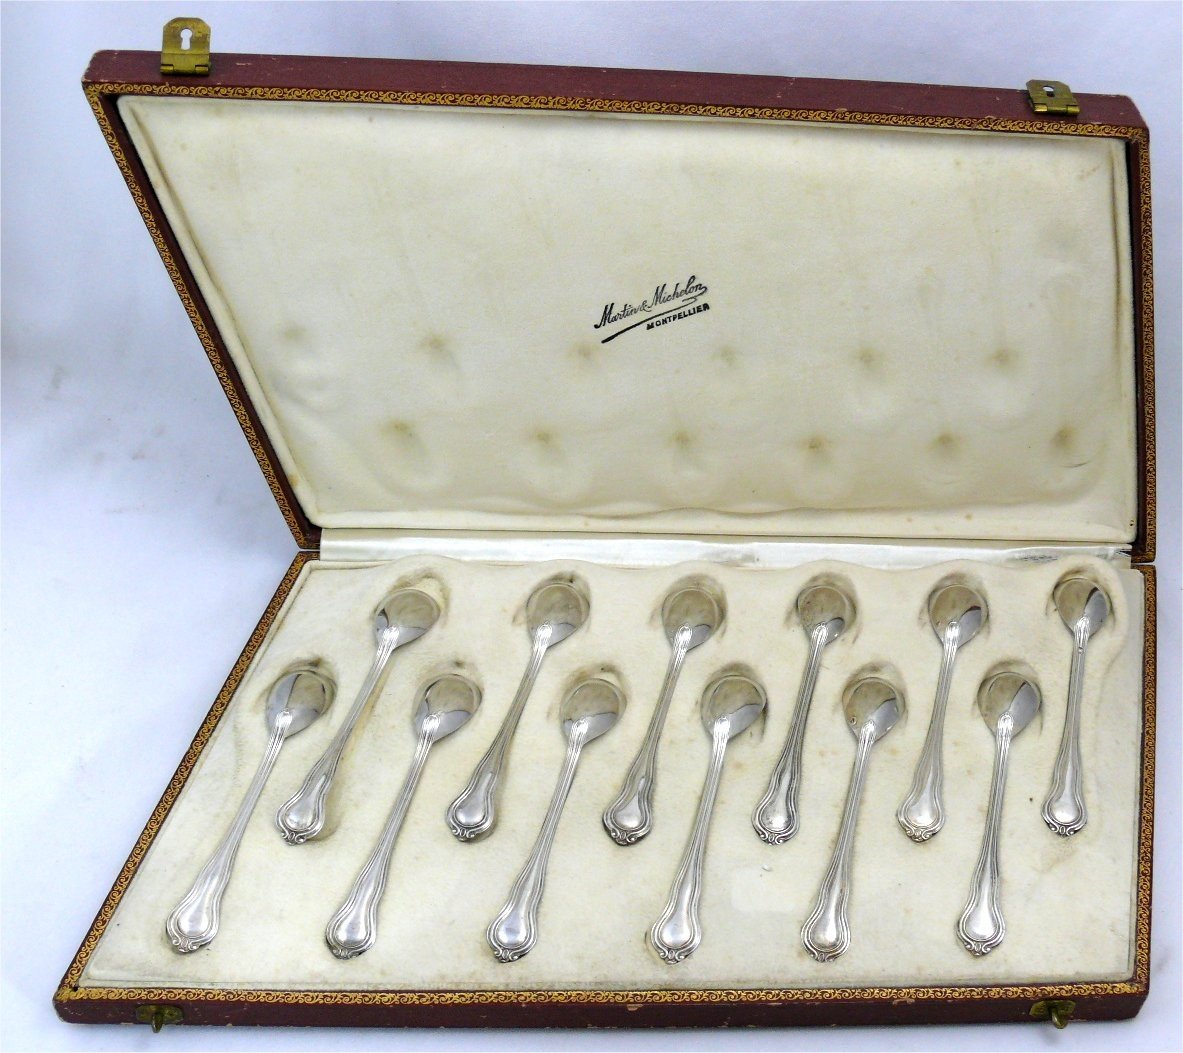 12 Egg Spoons In Sterling Silver Minerva, Excellent Condition, Without Monogram.